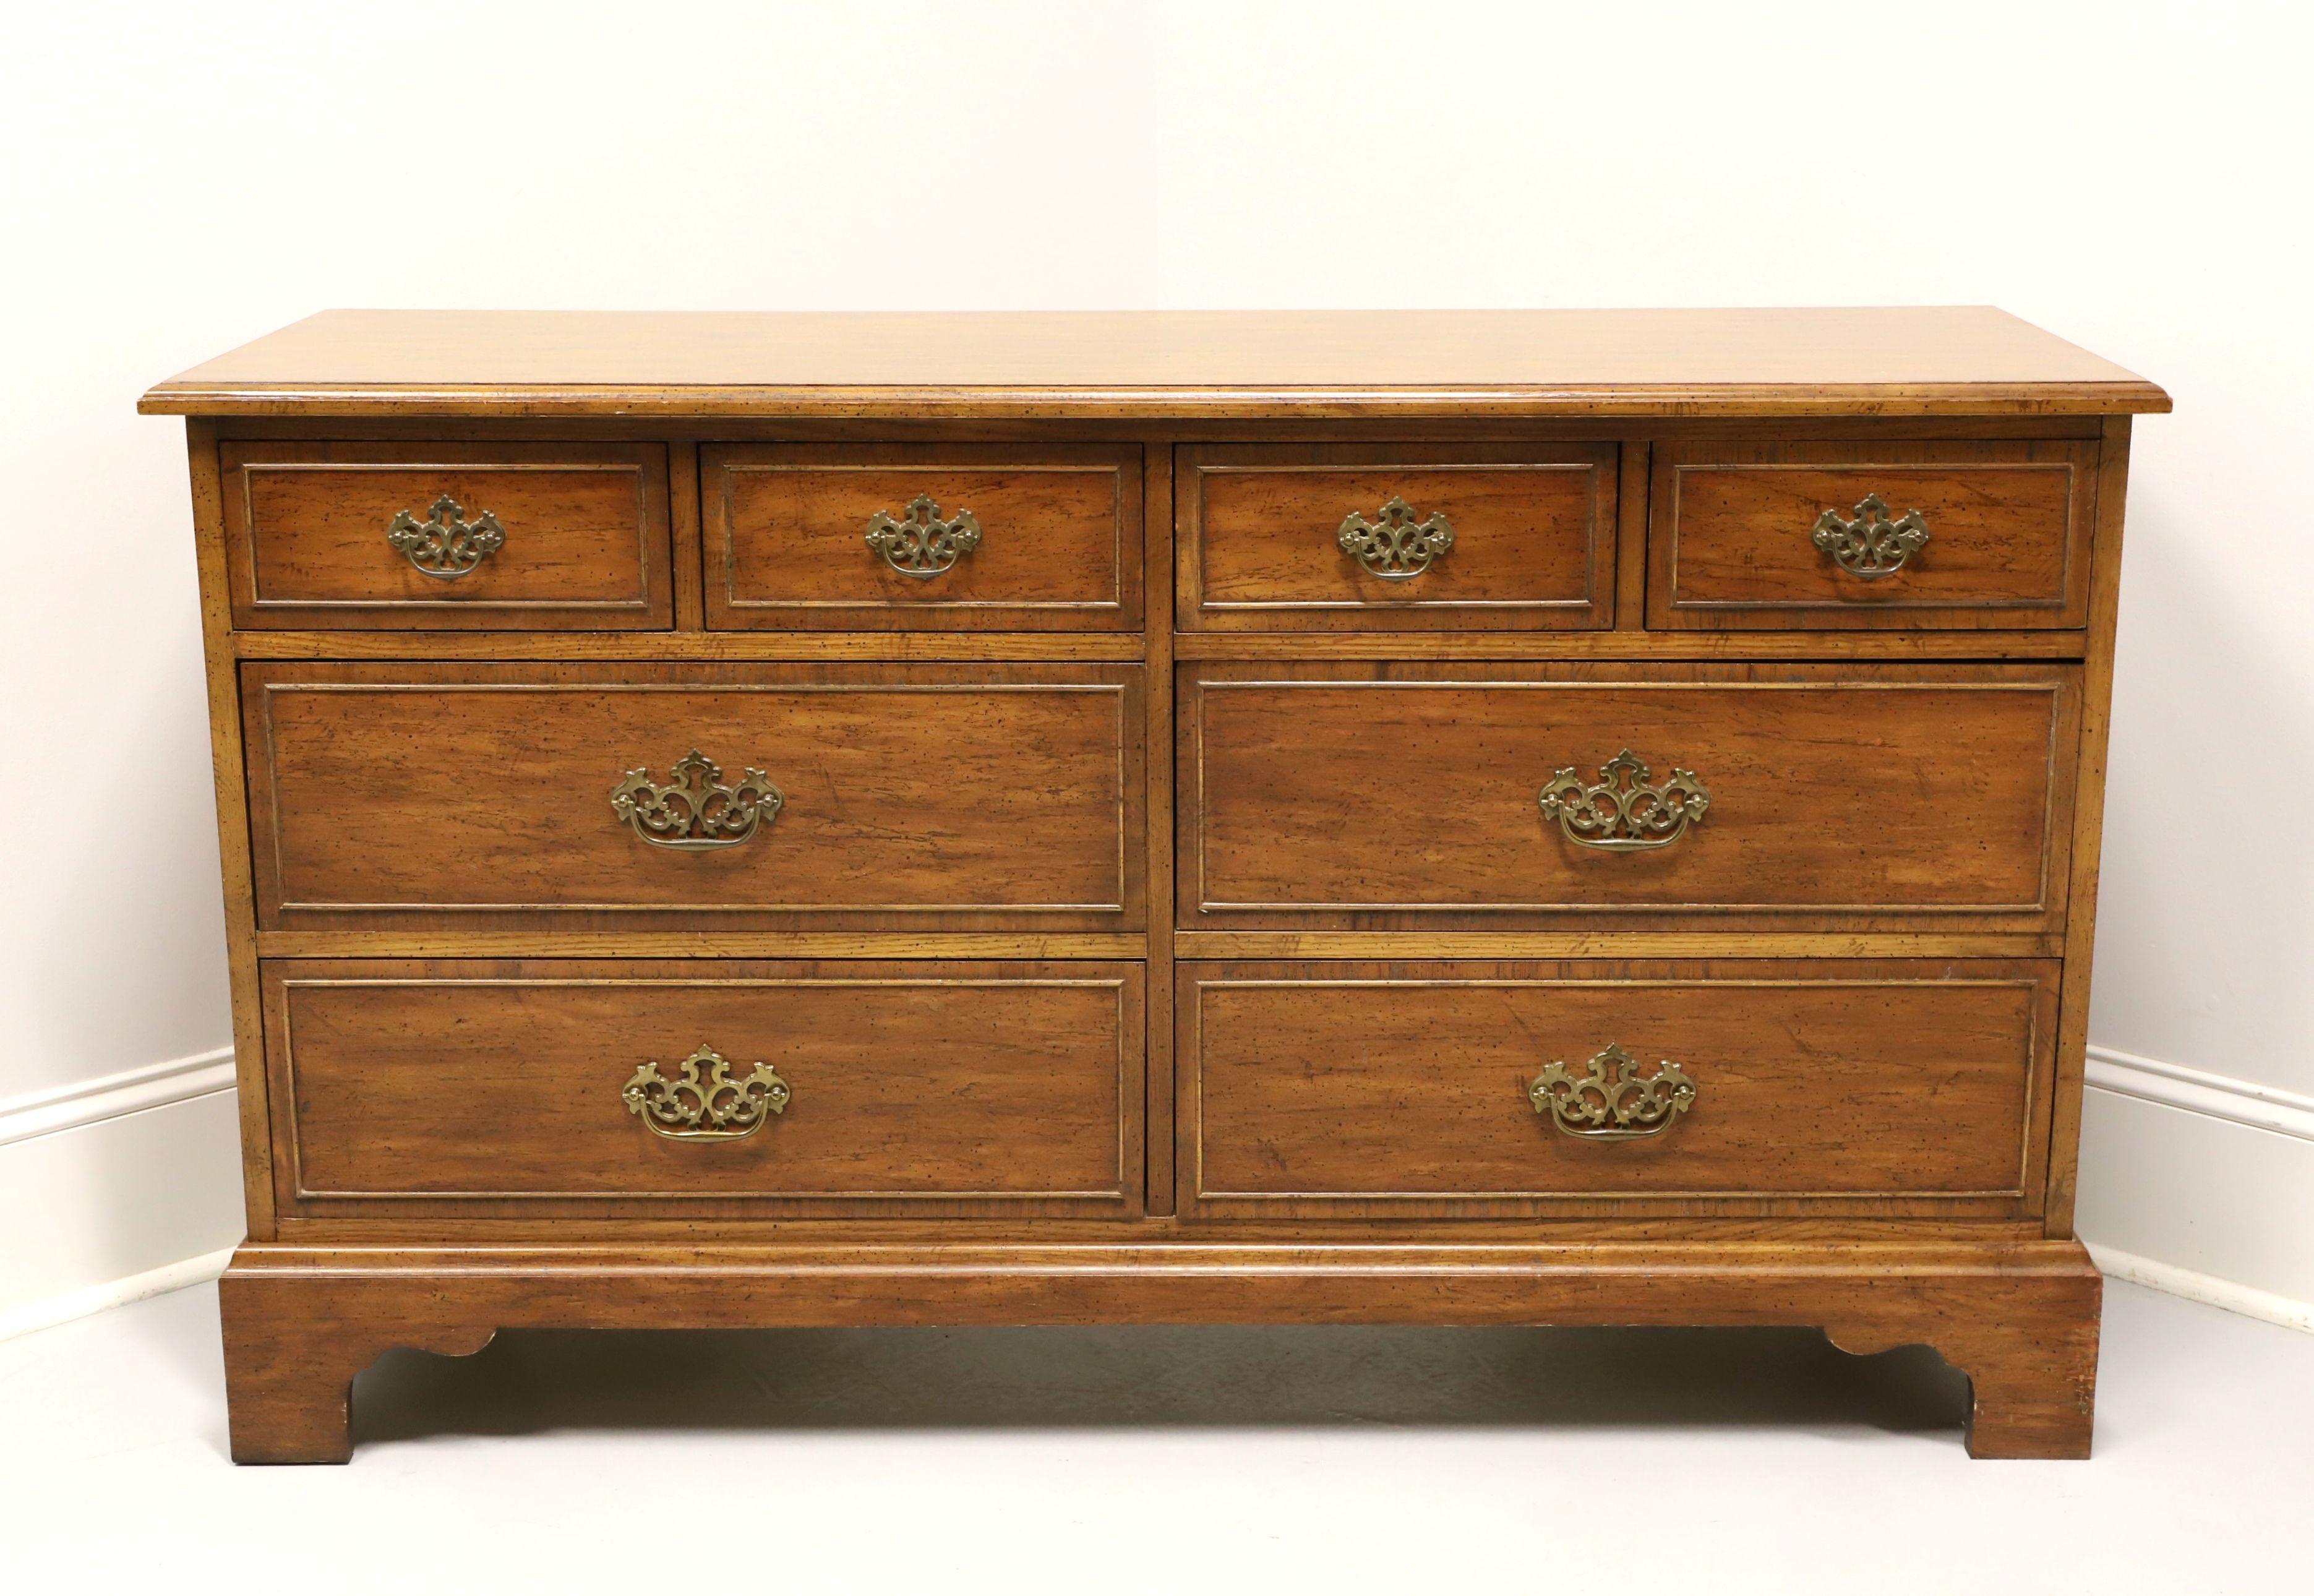 A Chippendale style double dresser by Dixie Furniture, from their Sheffield Manor Collection. Pecan with a distressed finish, brass hardware, bevel edge to the top, cockbeading to drawer fronts, and bracket feet. Features four smaller over four